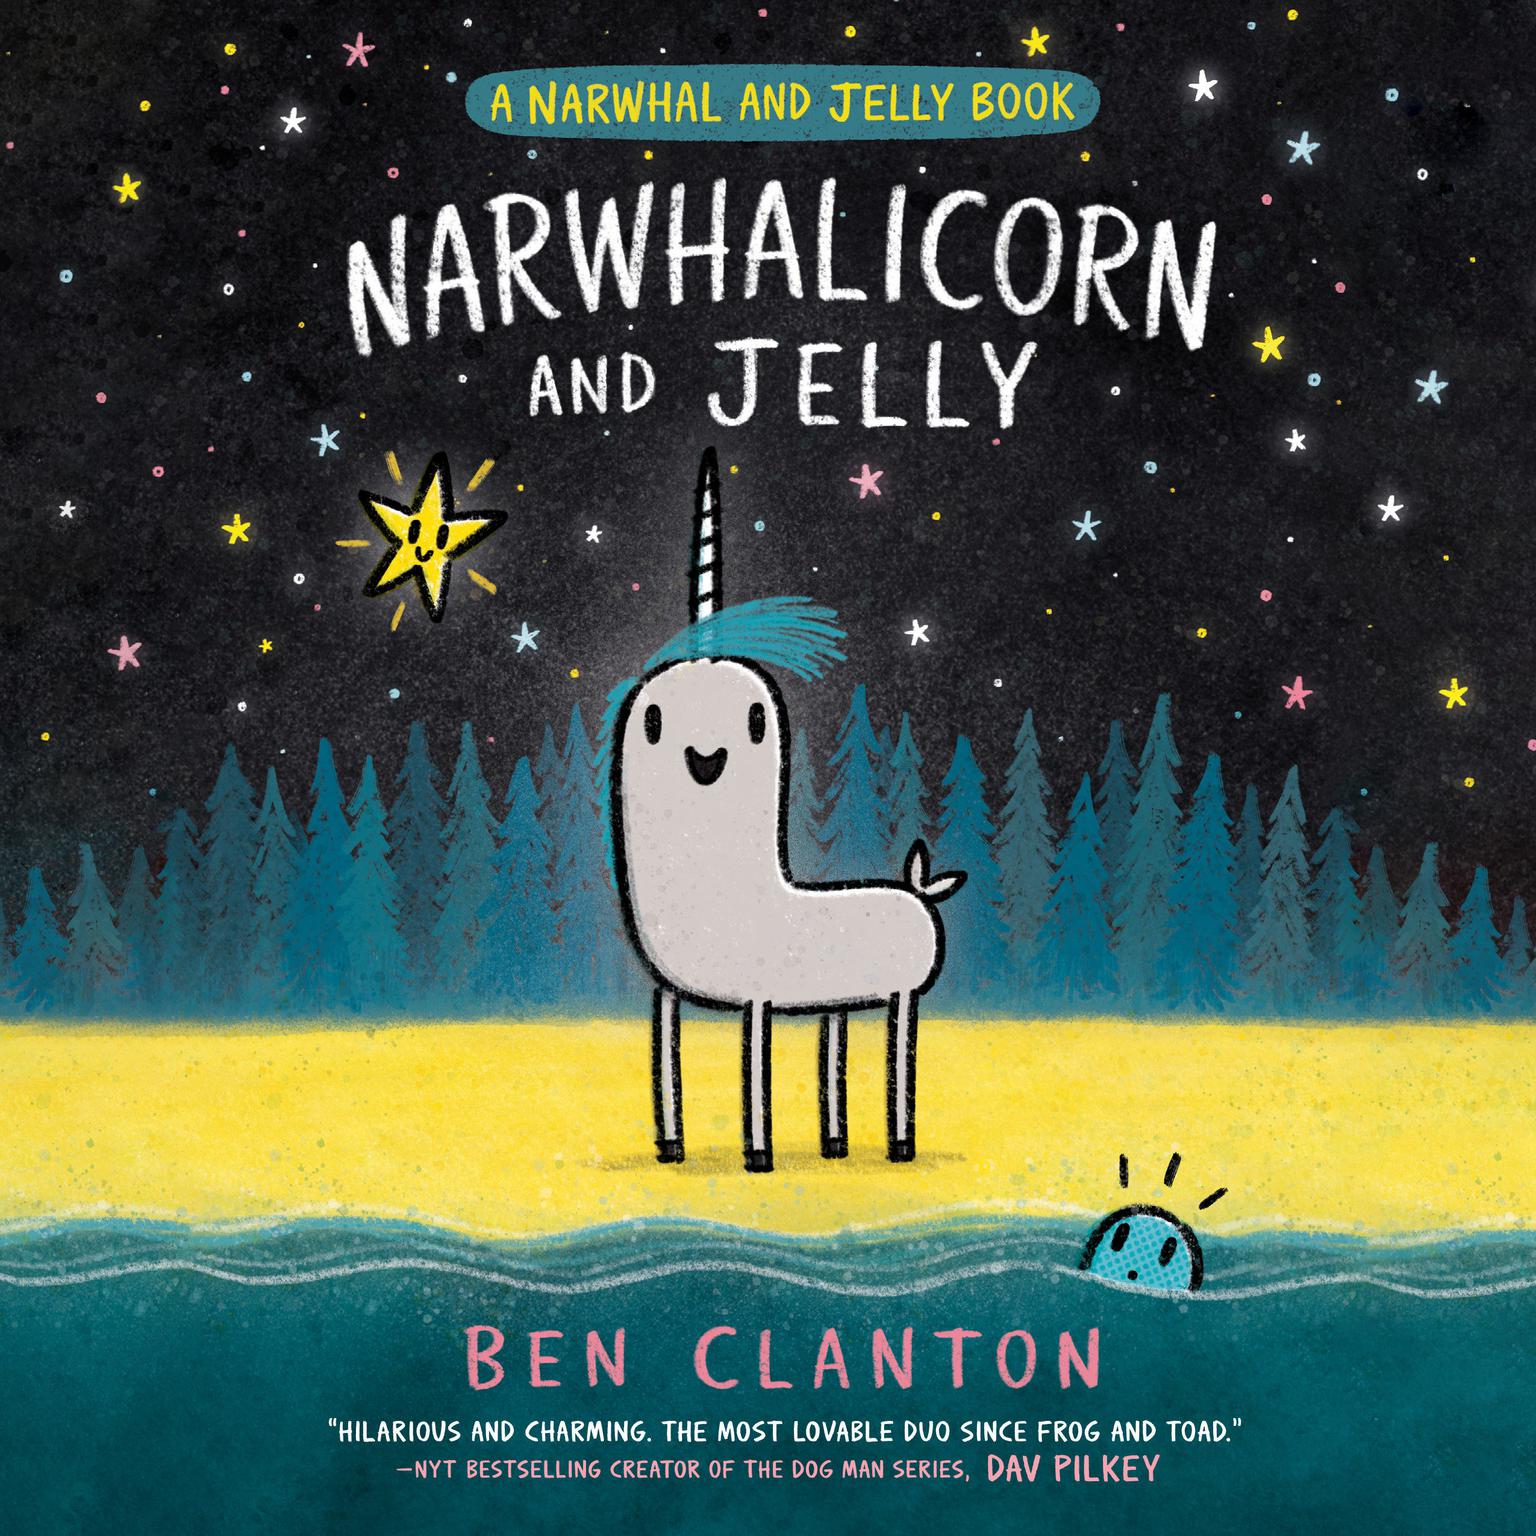 Narwhalicorn and Jelly (A Narwhal and Jelly Book #7) Audiobook, by Ben Clanton